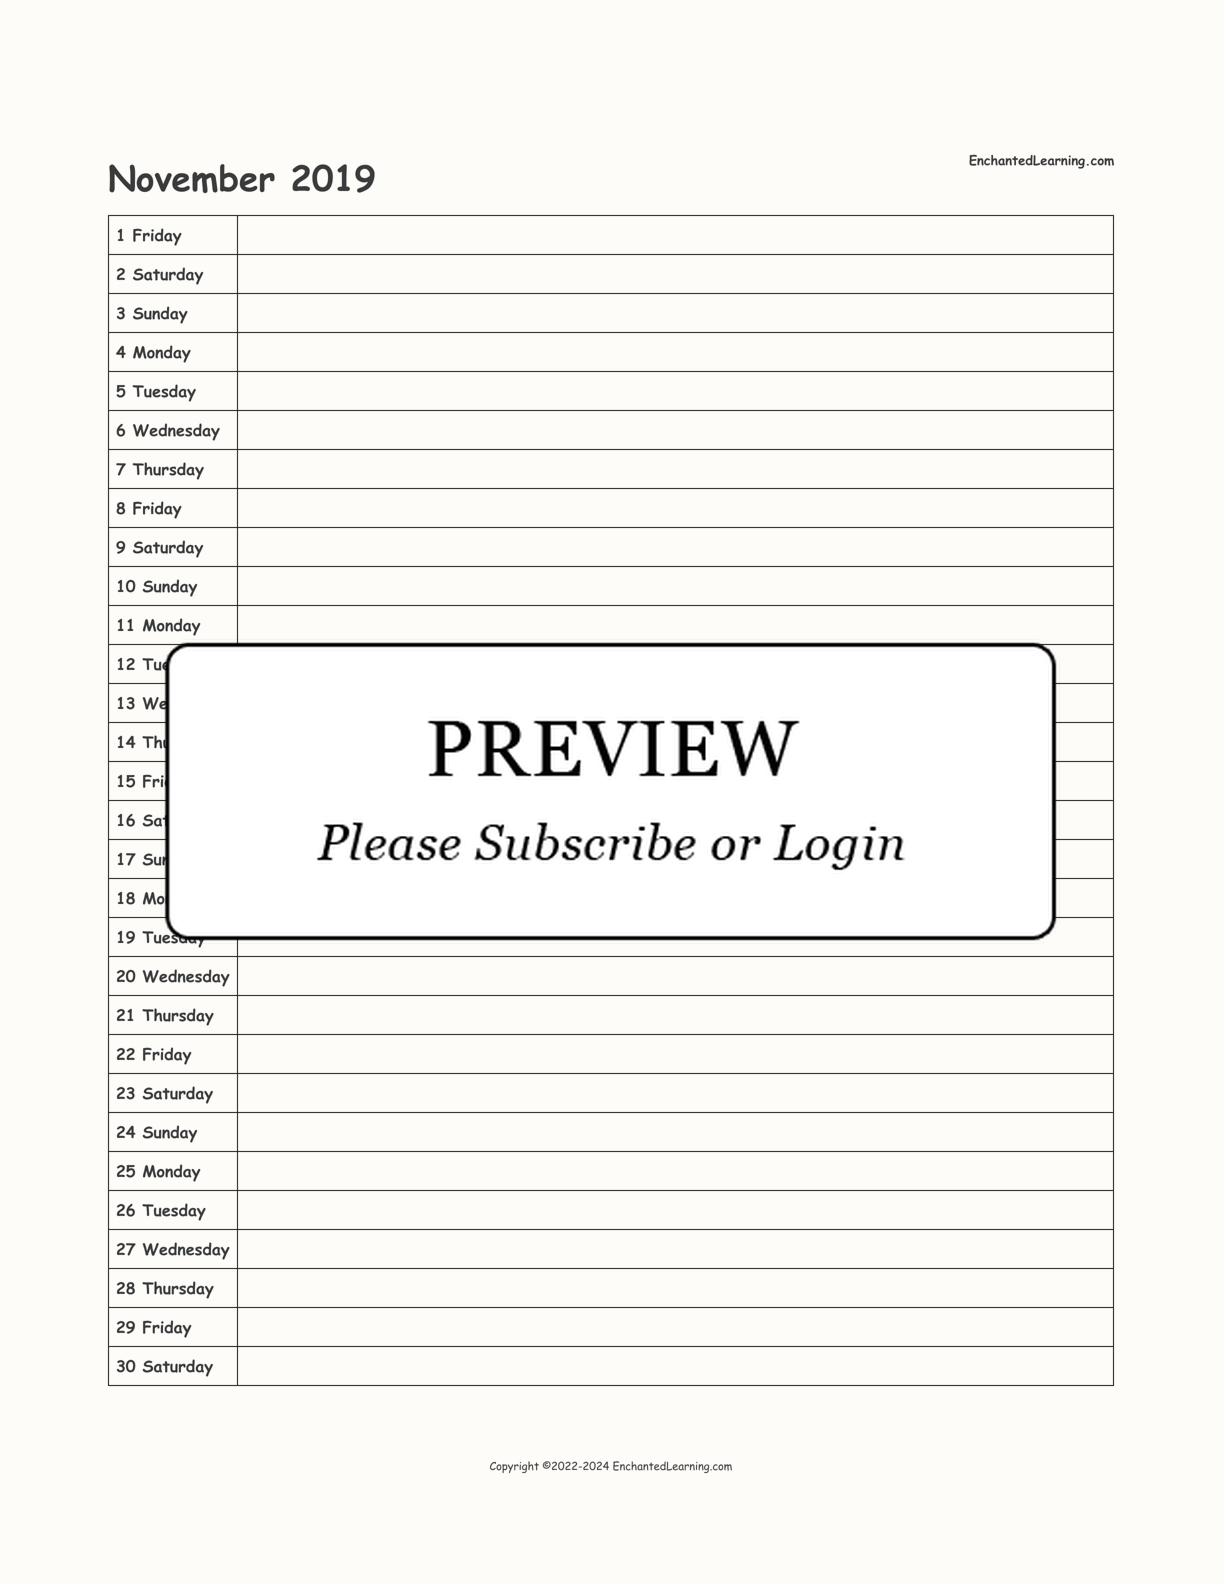 2019 Scheduling Calendar interactive printout page 11